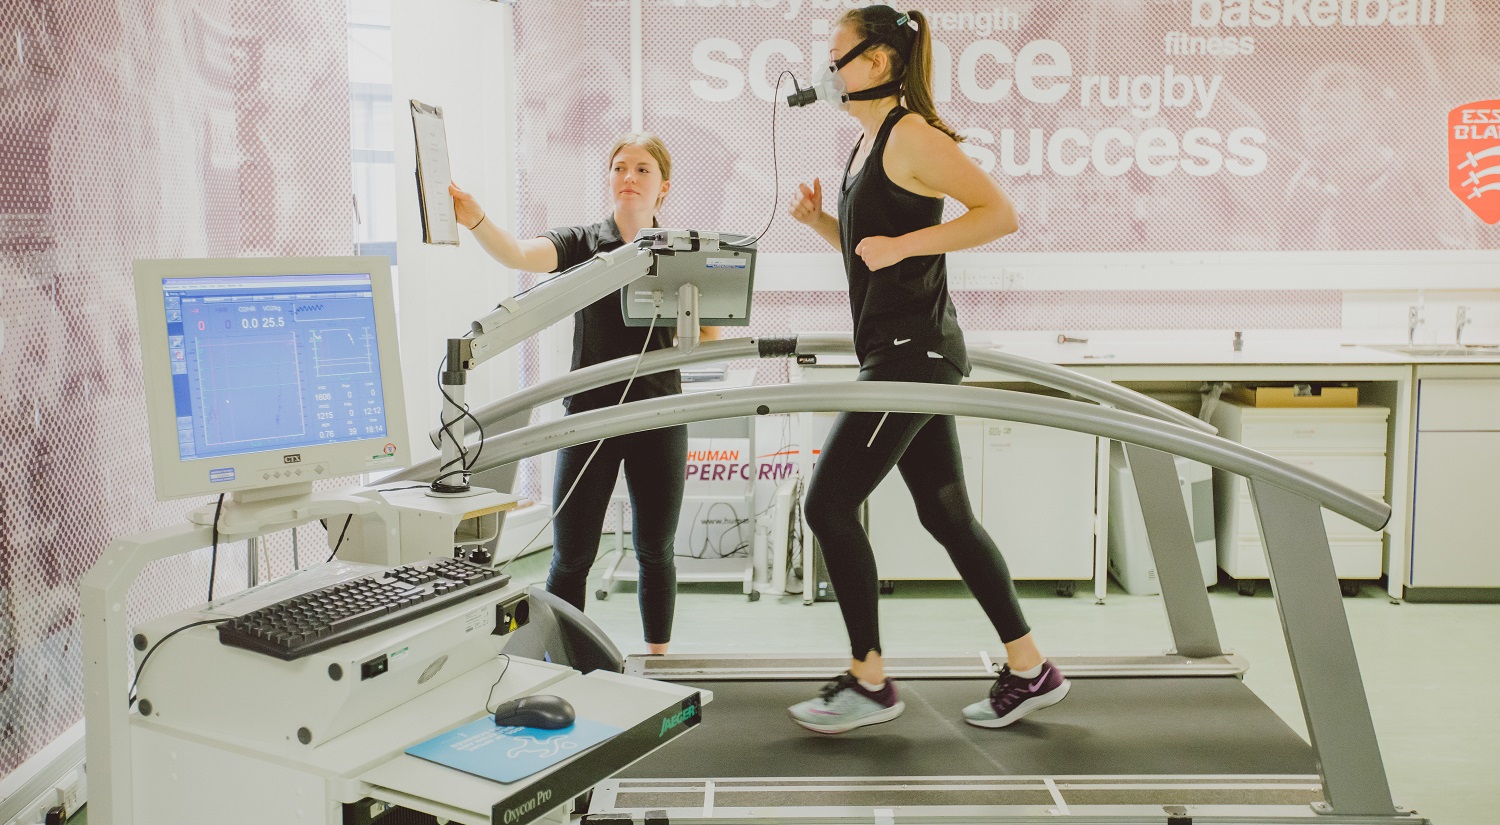 An athlete running on a treadmill while wearing a mask that may be measuring their breathing. A sports scientist is standing next to the treadmill, holding up a clipboard in front of the athlete. A computer tracking information from the athlete is in the foreground.